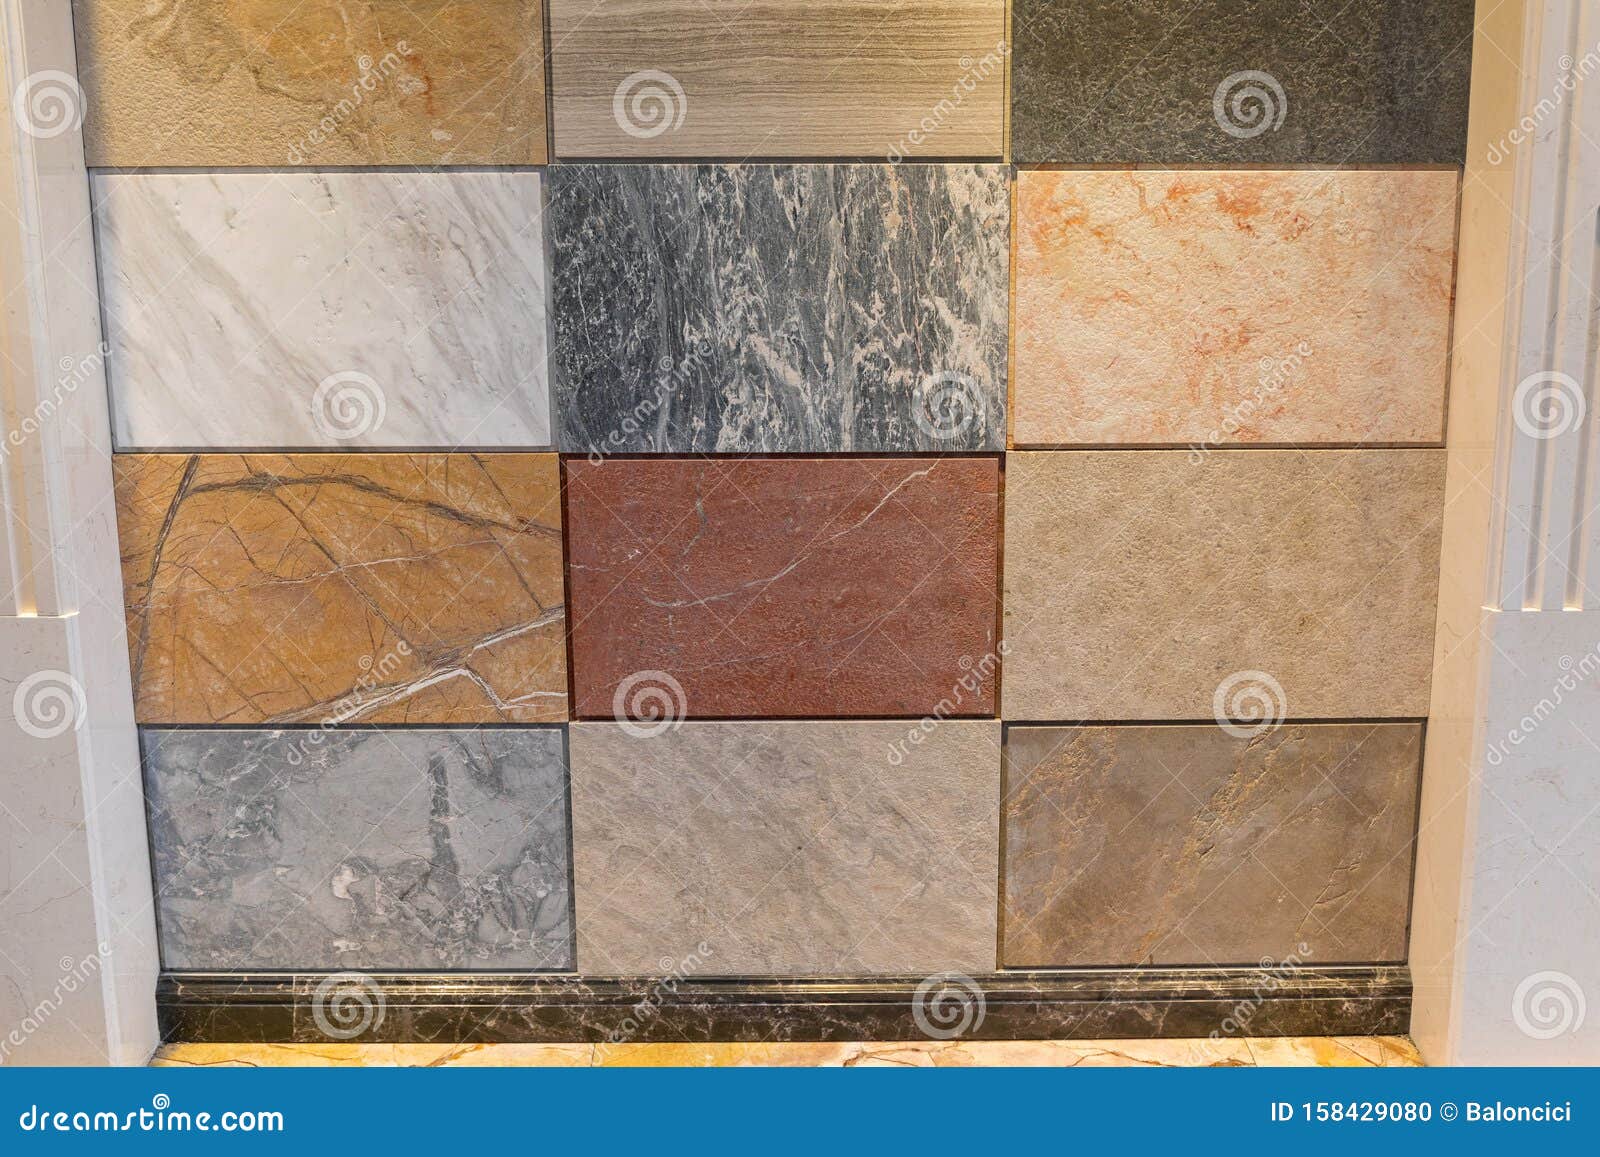 Marble Wall Tiles stock photo. Image of asia, tile, marble - 158429080